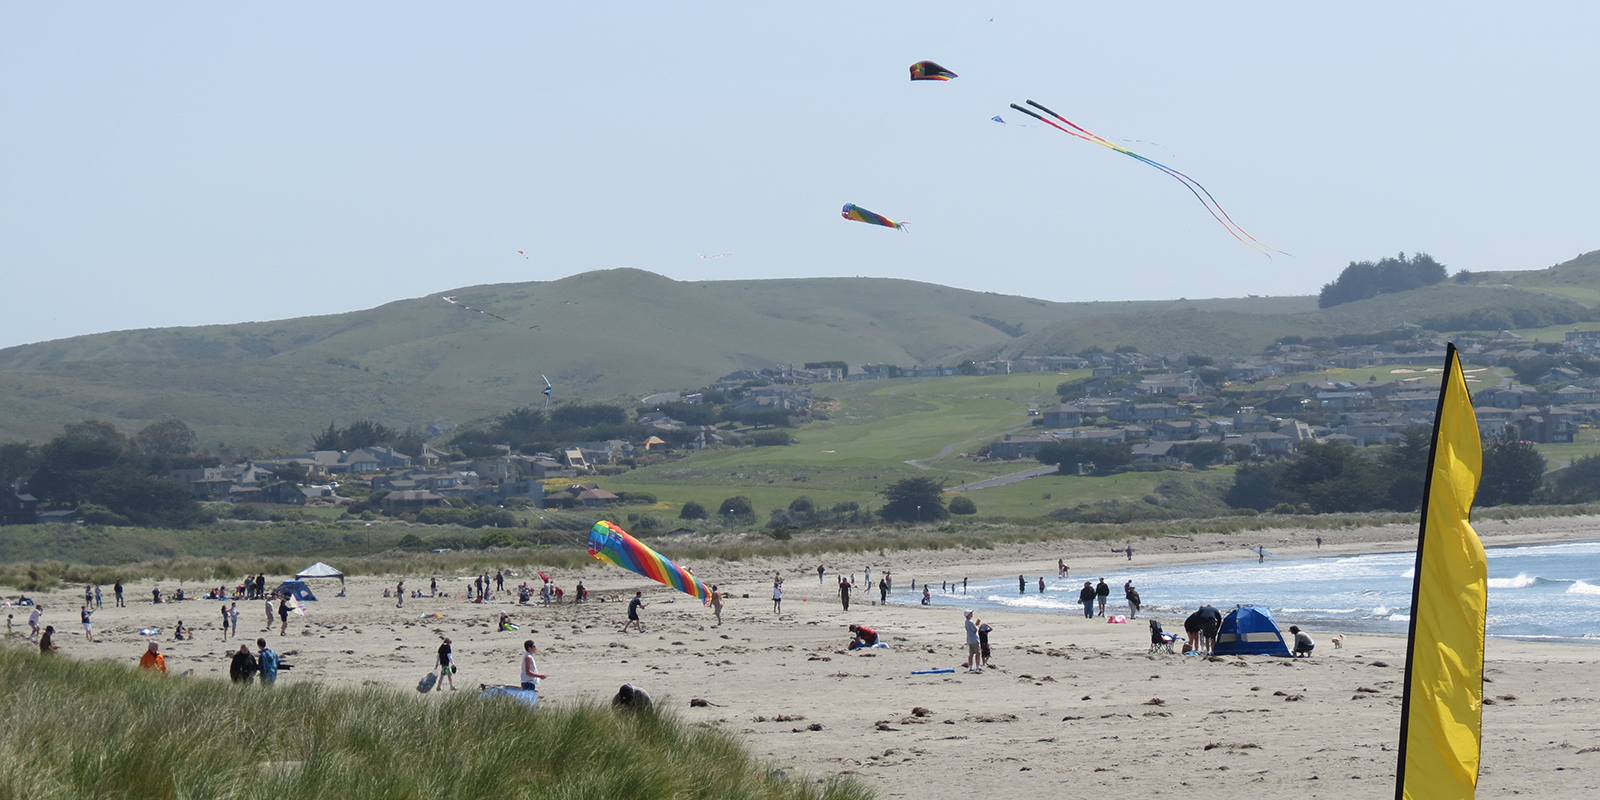 Multi-colored kites flying above Doran Beach on a clear day